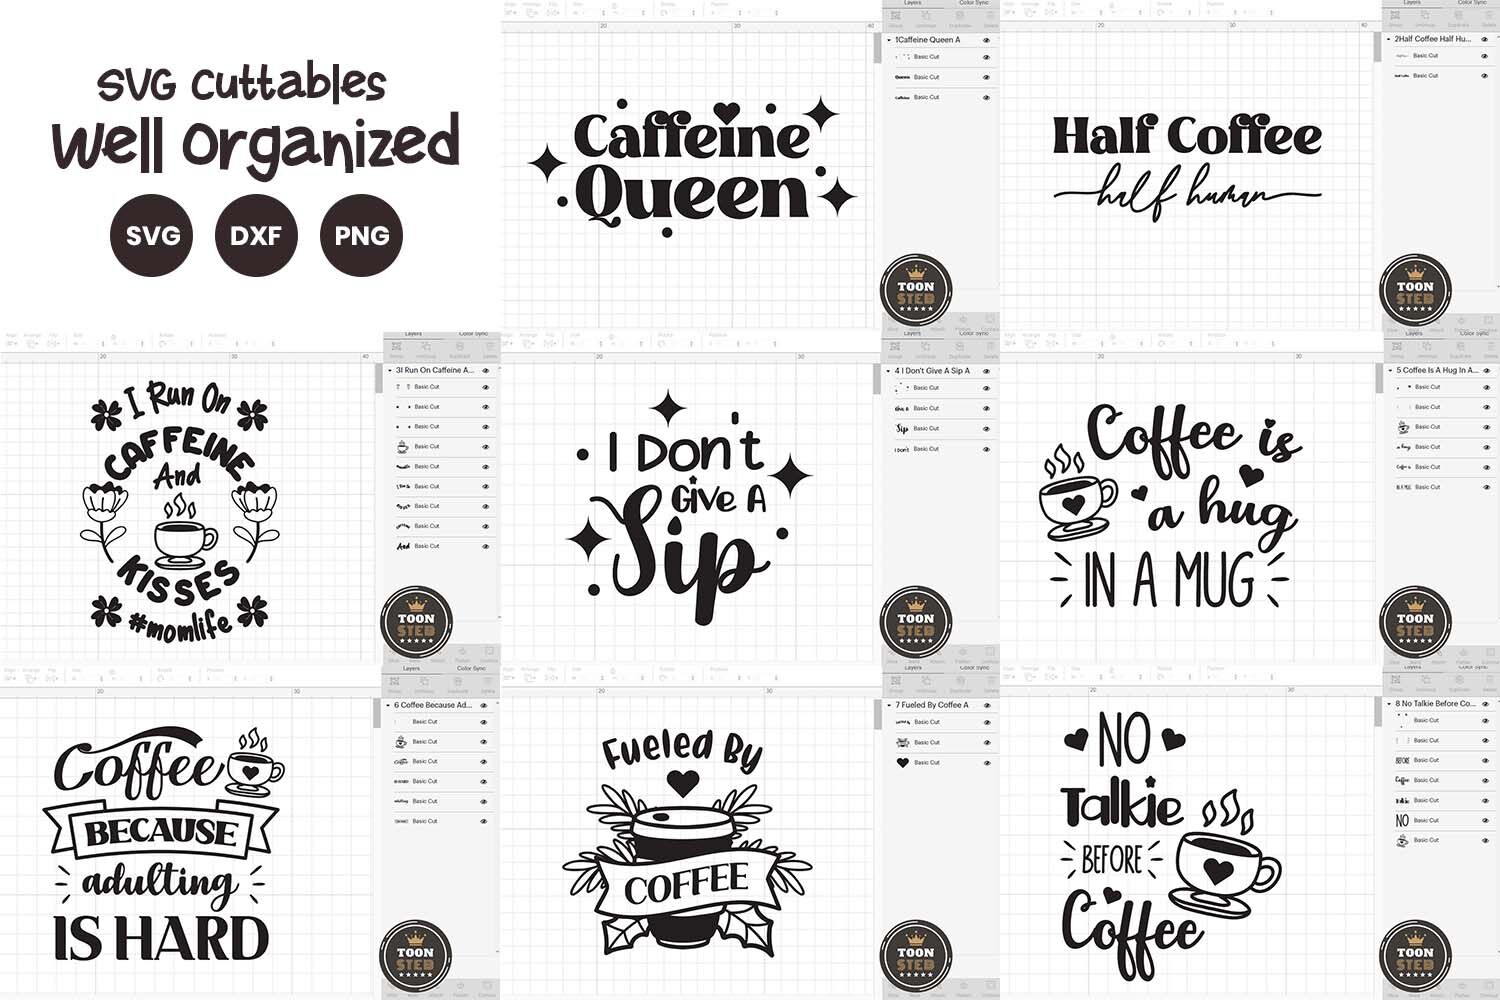 Funny and Cute Coffee Cup Sayings SVG Bundle (Instant Download) 